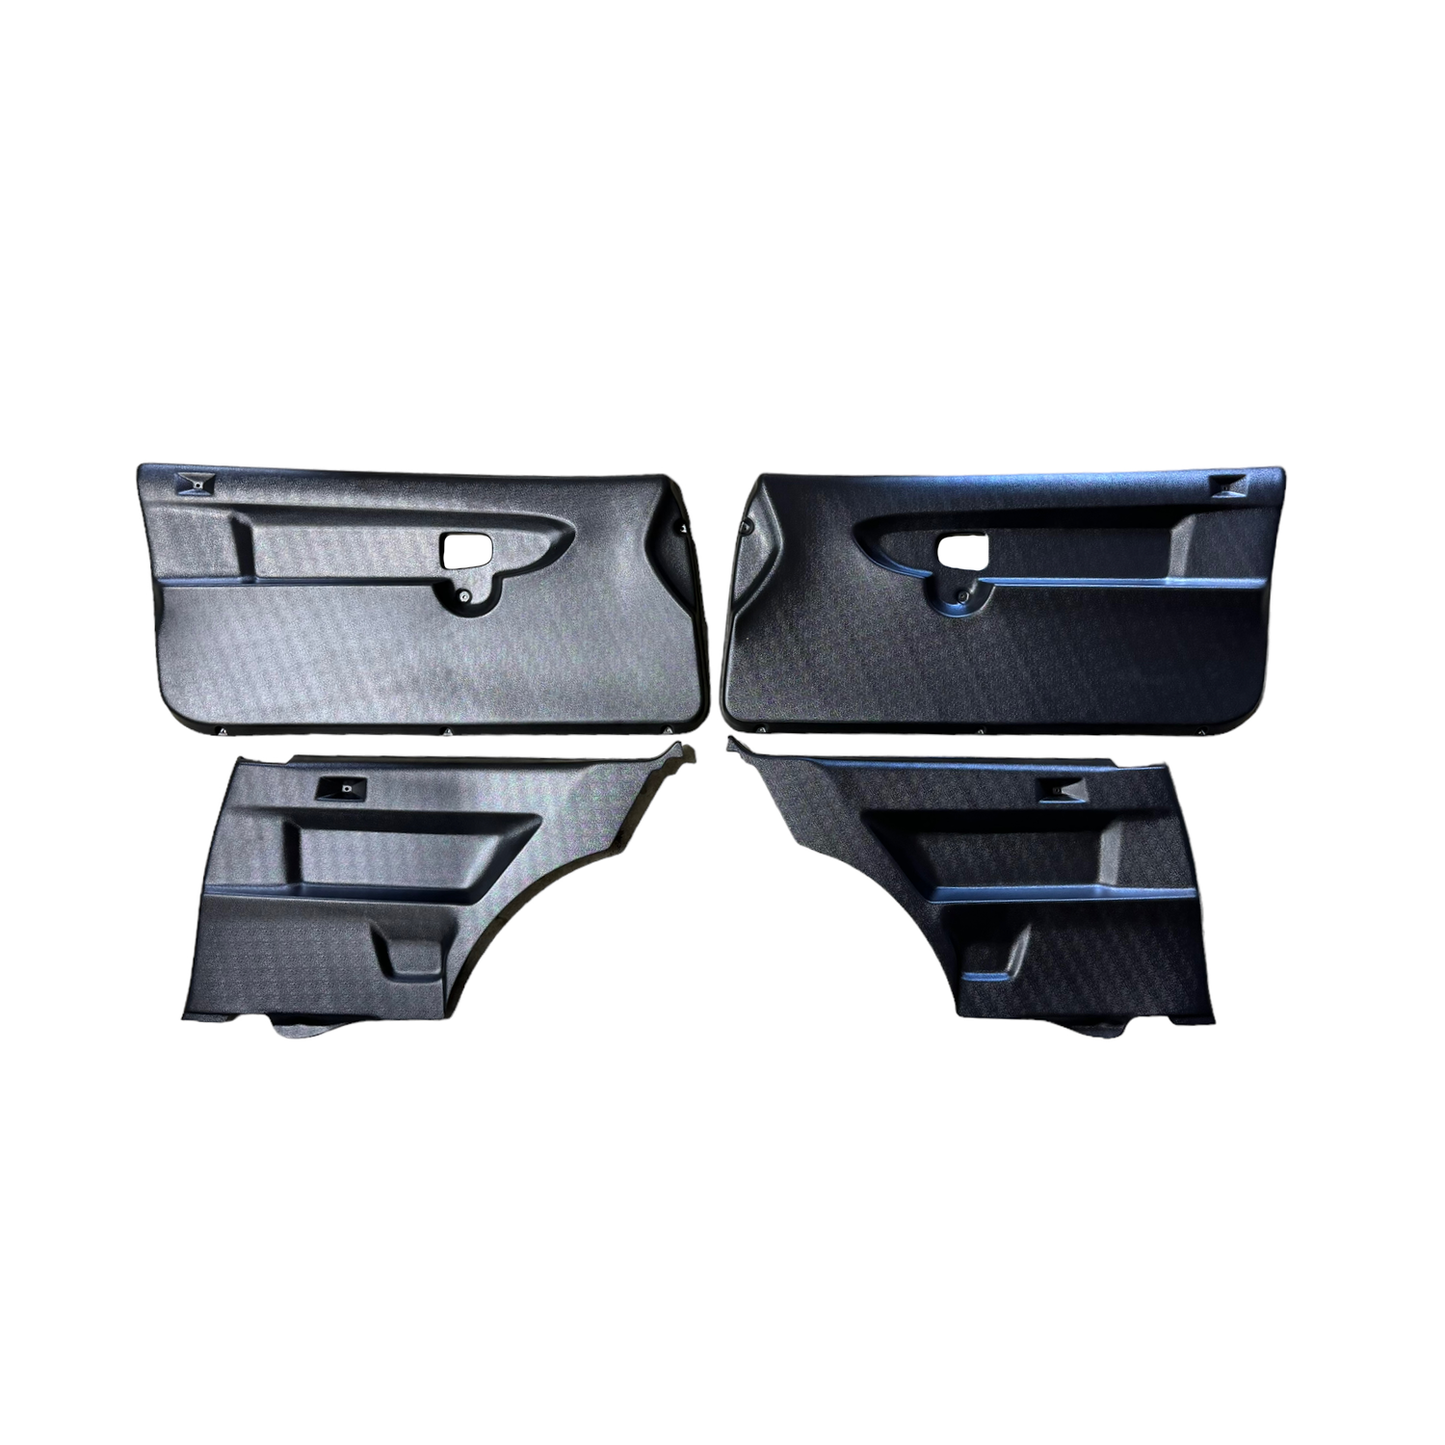 Race German -  BMW E36 Coupe Door Card Panel Replacement